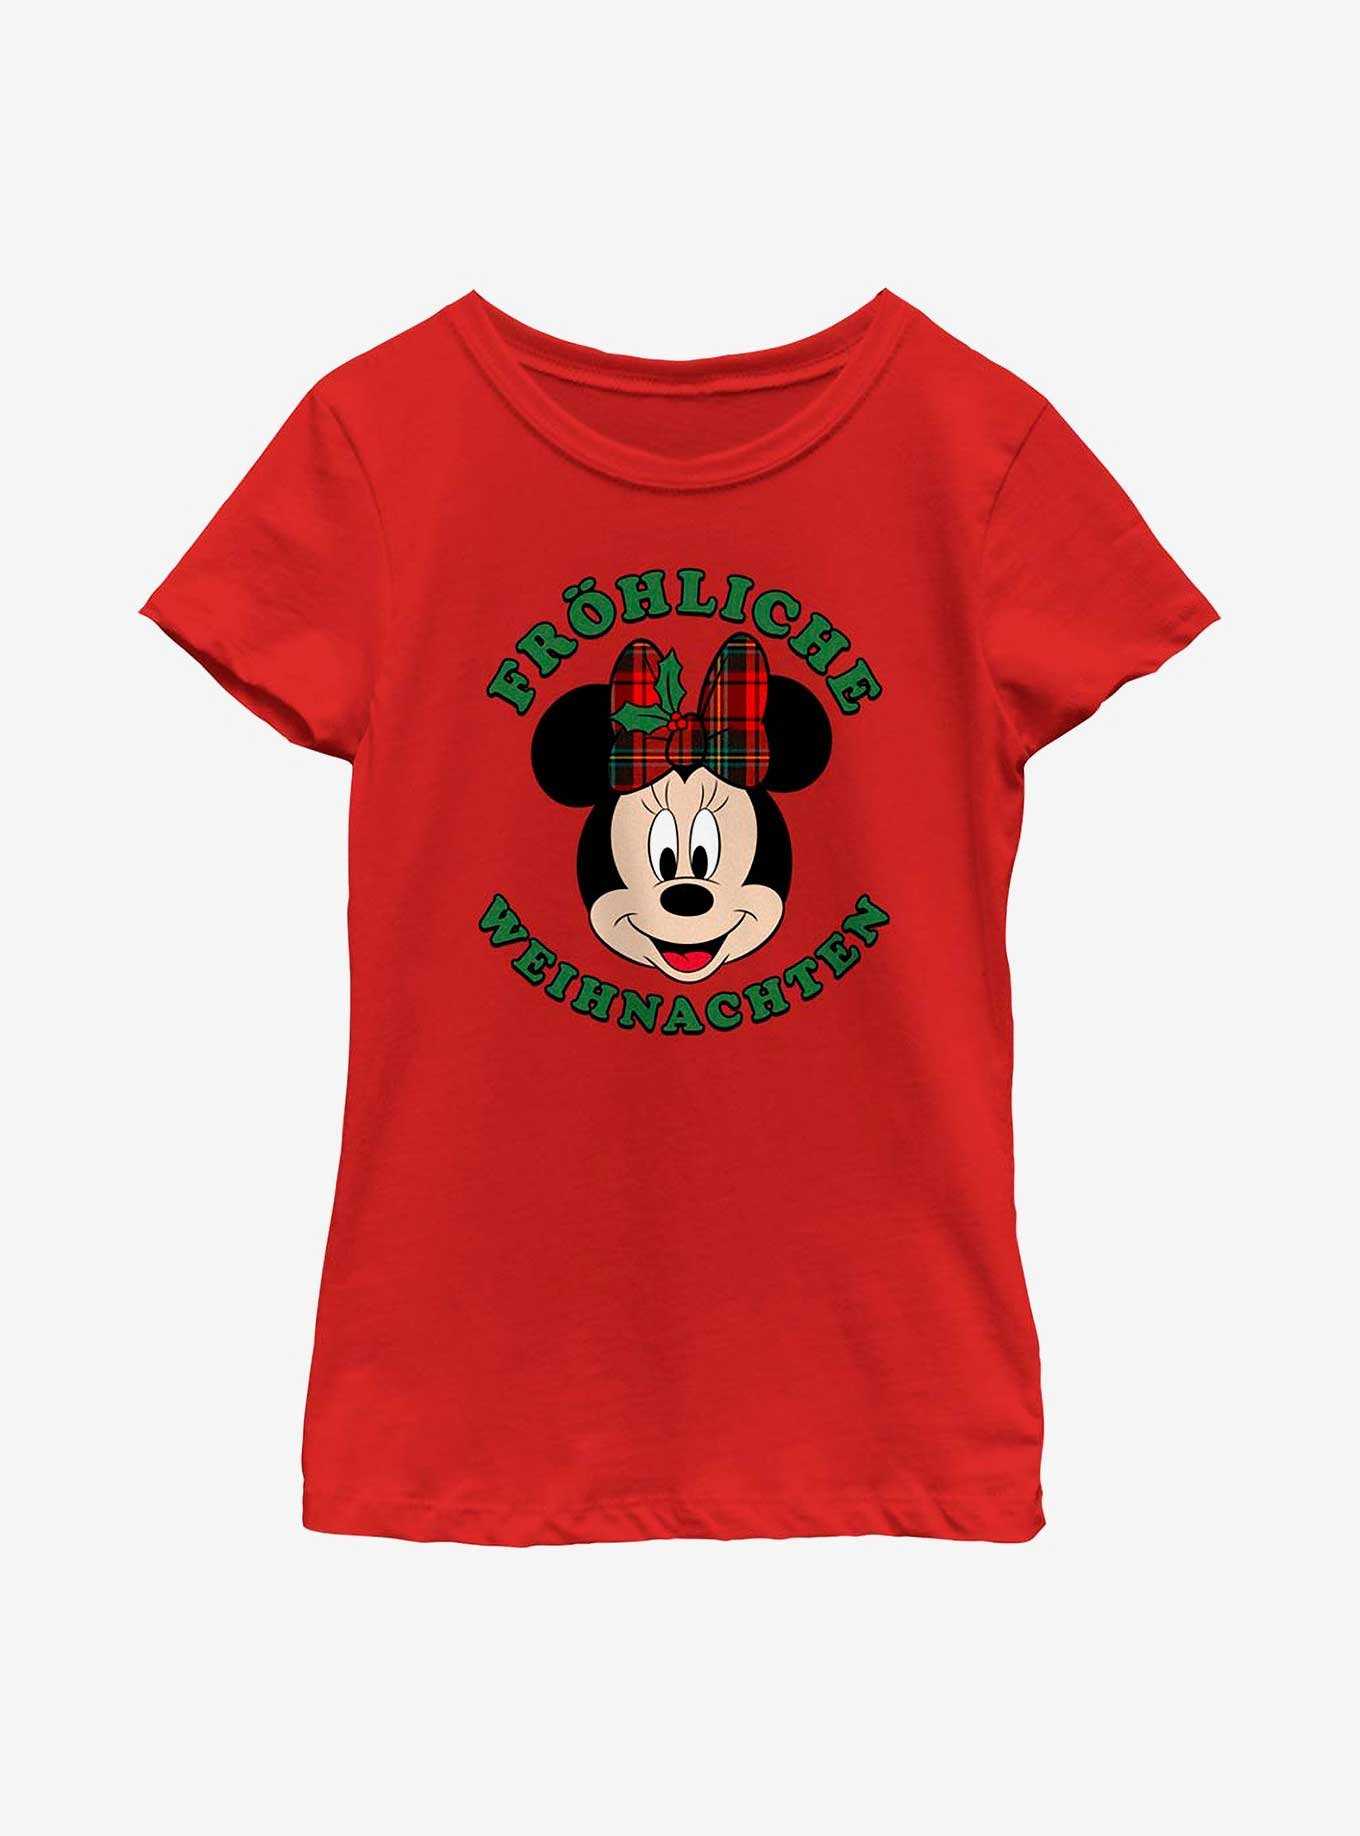 Disney Minnie Mouse Frohliche Weihnachten Merry Christmas in German Youth Girls T-Shirt, , hi-res